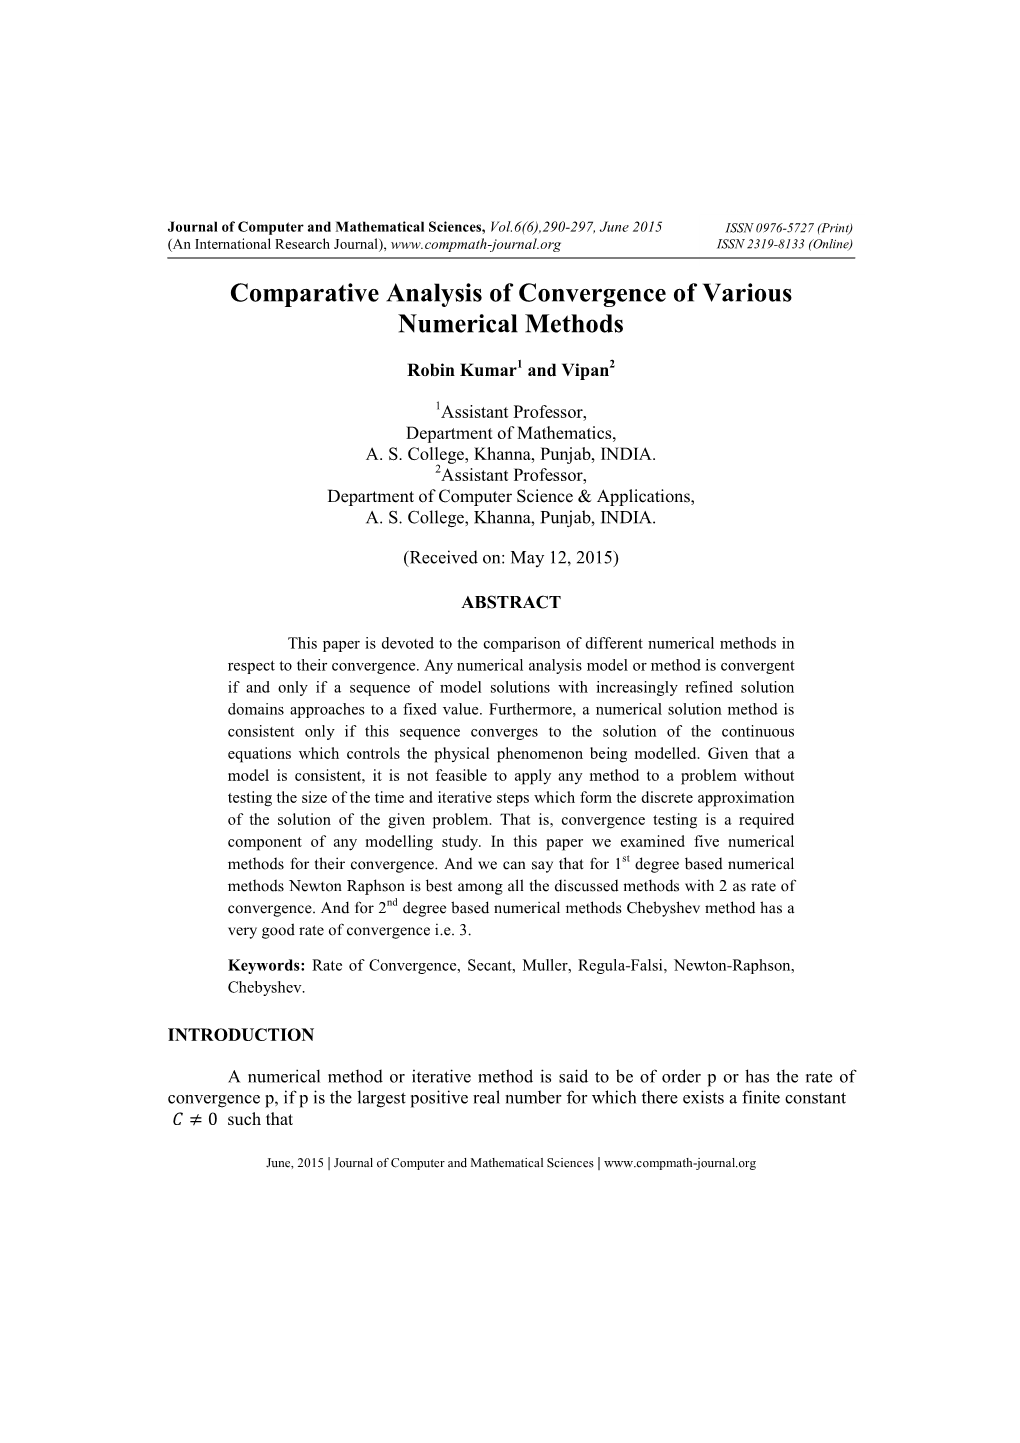 Comparative Analysis of Convergence of Various Numerical Methods